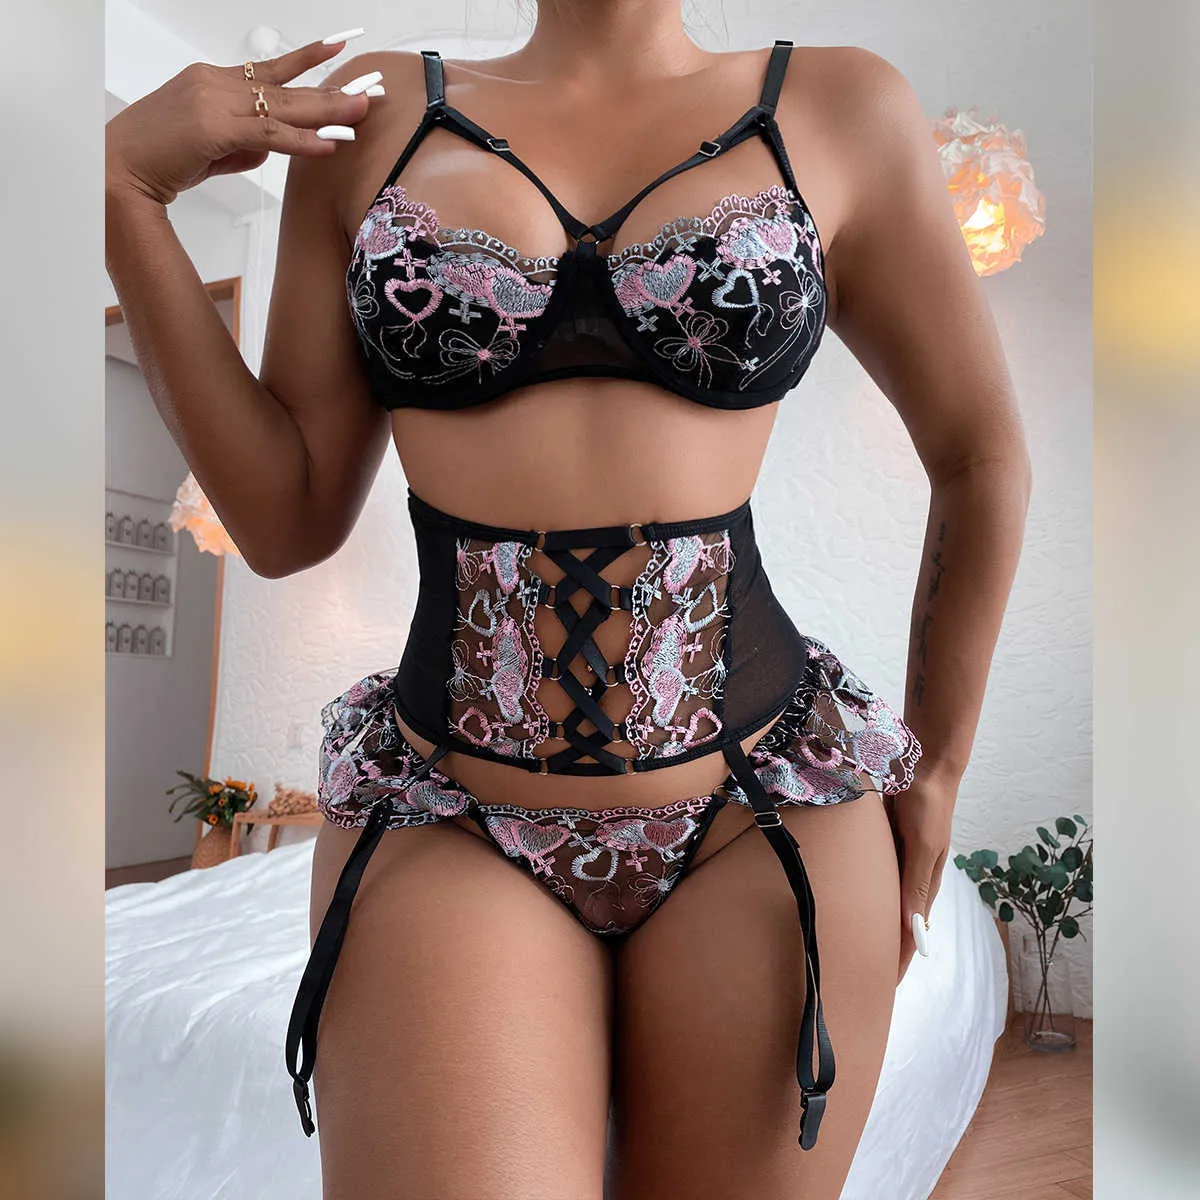 ECTOOKO Rhinestone Lingerie Set See Through Lace Bra Panty Set And Panty  For Intimate Moments Uncensored And Sexy T231027 From Catherine002, $2.89